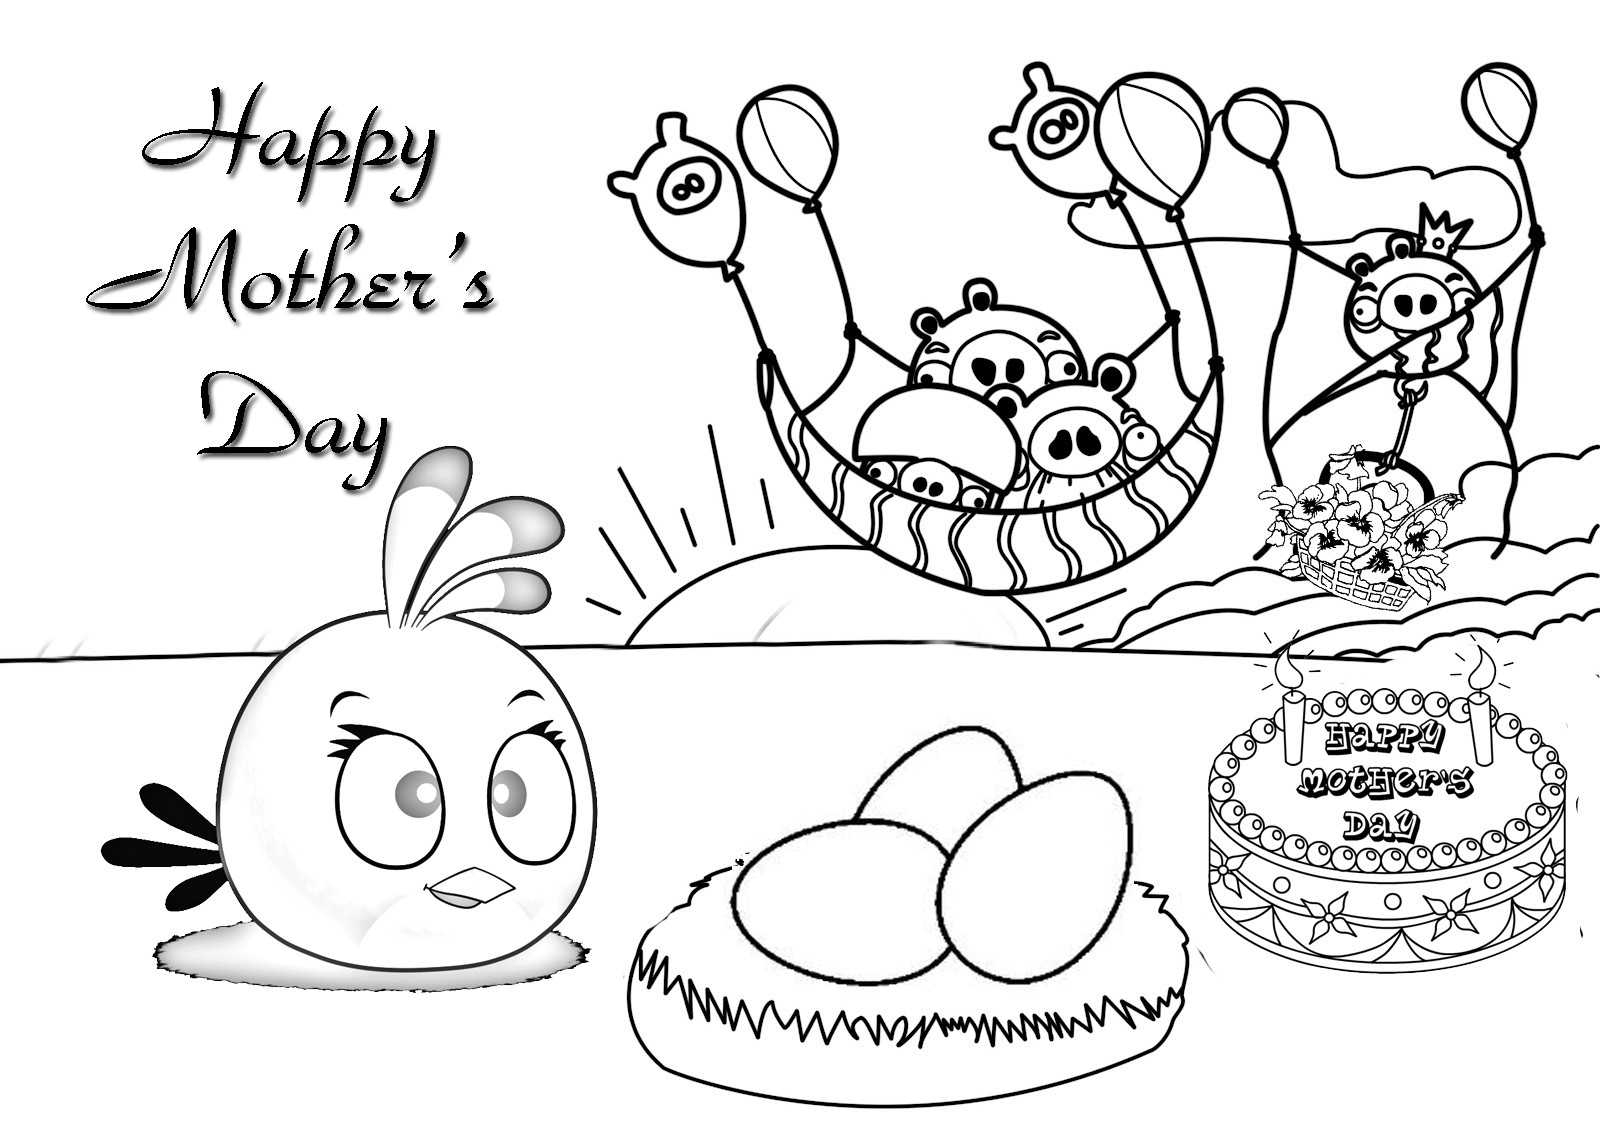 Mothers Day Free Printable Coloring Sheets
 Free Printable Mothers Day Coloring Pages For Kids